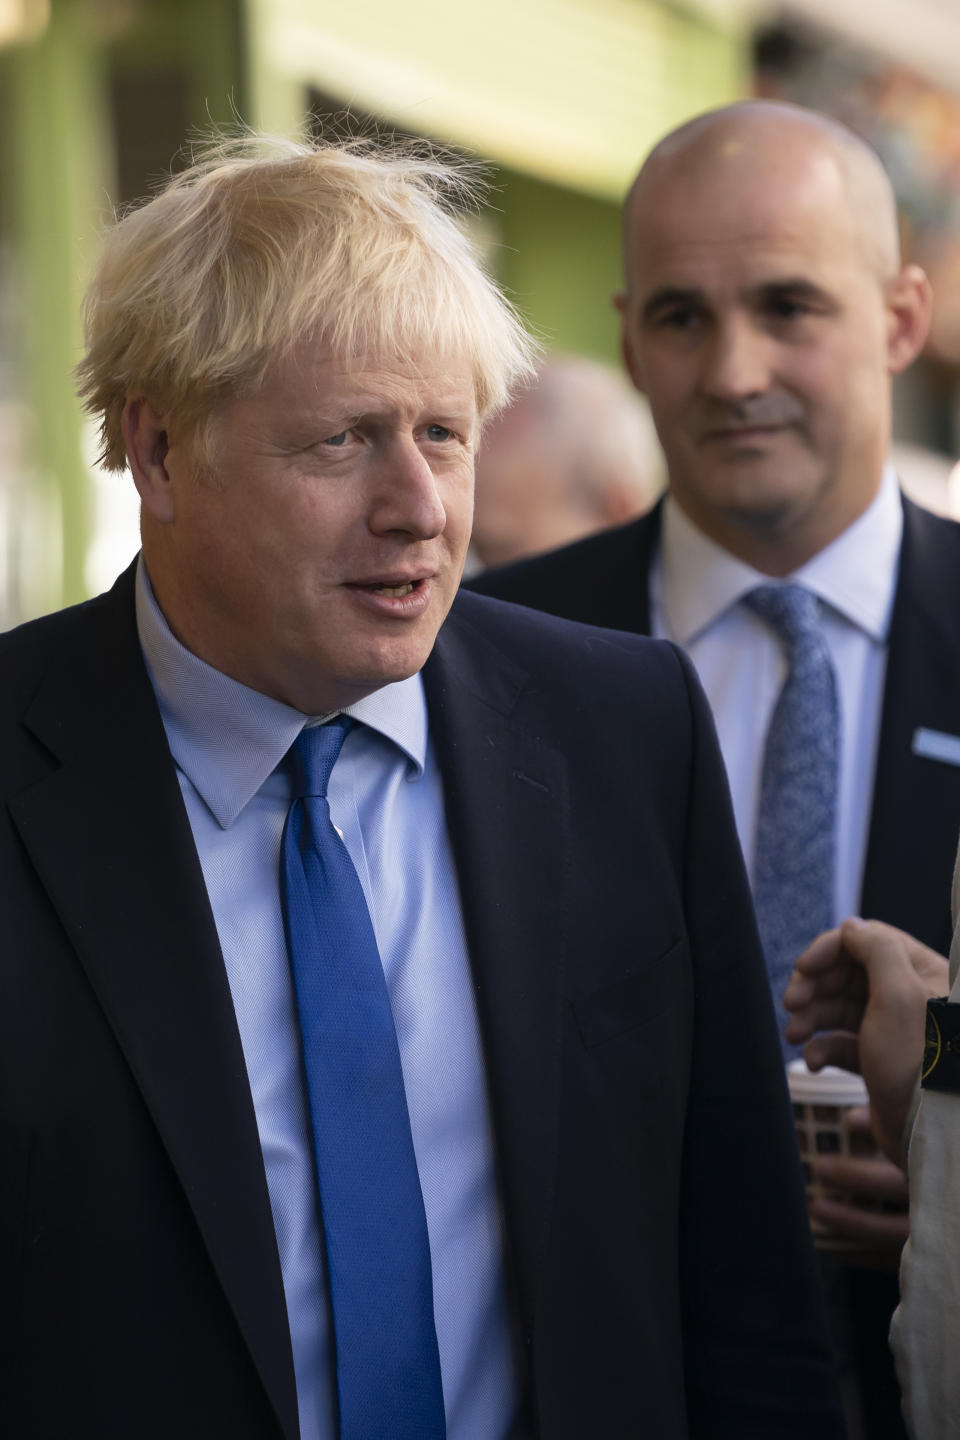 Britain's Prime Minister Boris Johnson is seen during a visit to Doncaster Market, in Doncaster, Northern England, Friday Sept. 13, 2019. Johnson will meet with European Commission president Jean-Claude Juncker for Brexit talks Monday in Luxembourg. The Brexit negotiations have produced few signs of progress as the Oct. 31 deadline for Britain’s departure from the European Union bloc nears. ( AP Photo/Jon Super)